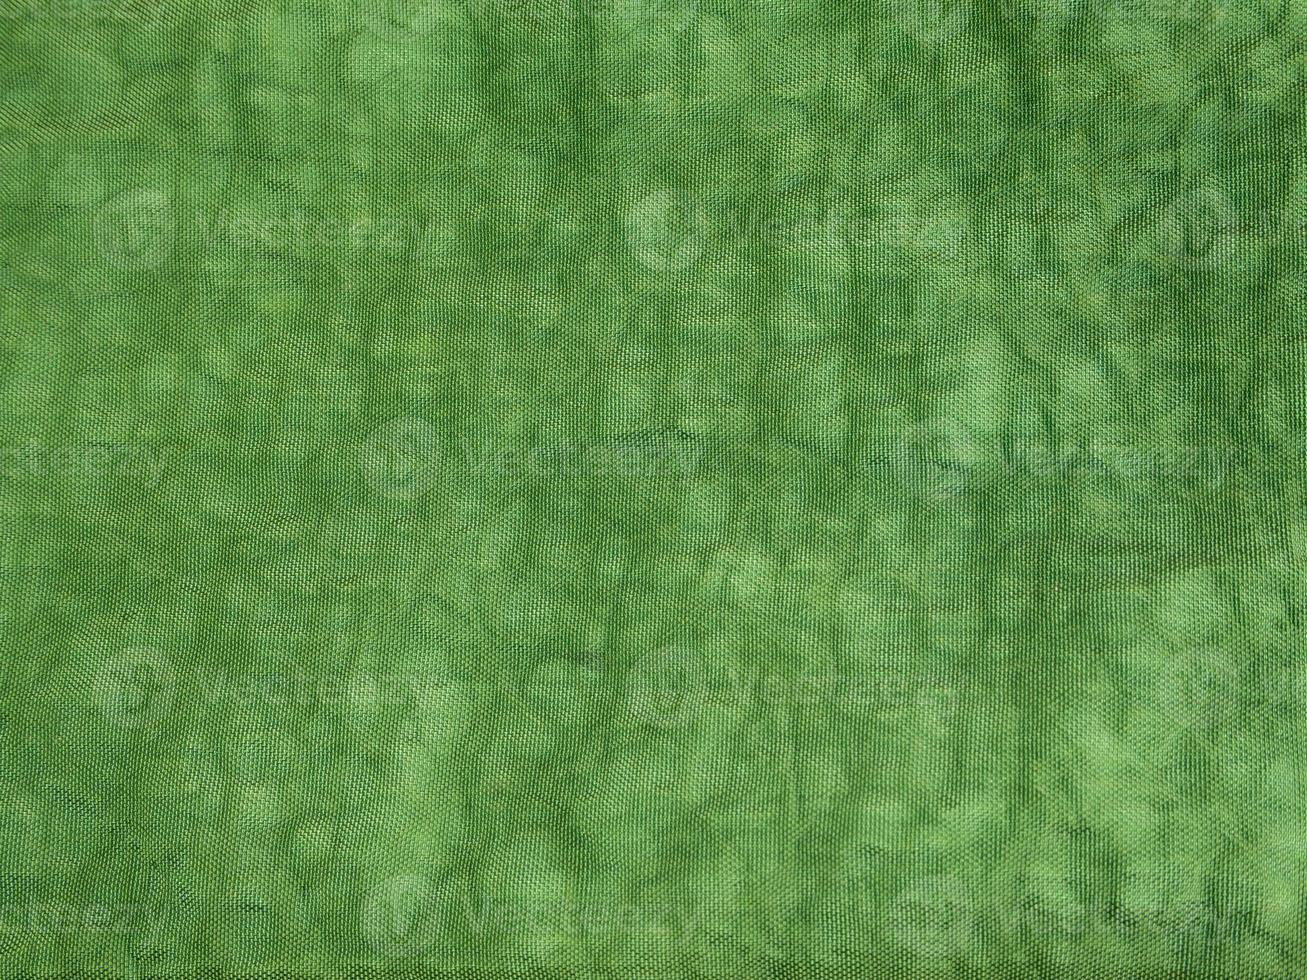 Surface texture of green color and crumpled canvas fabric photo